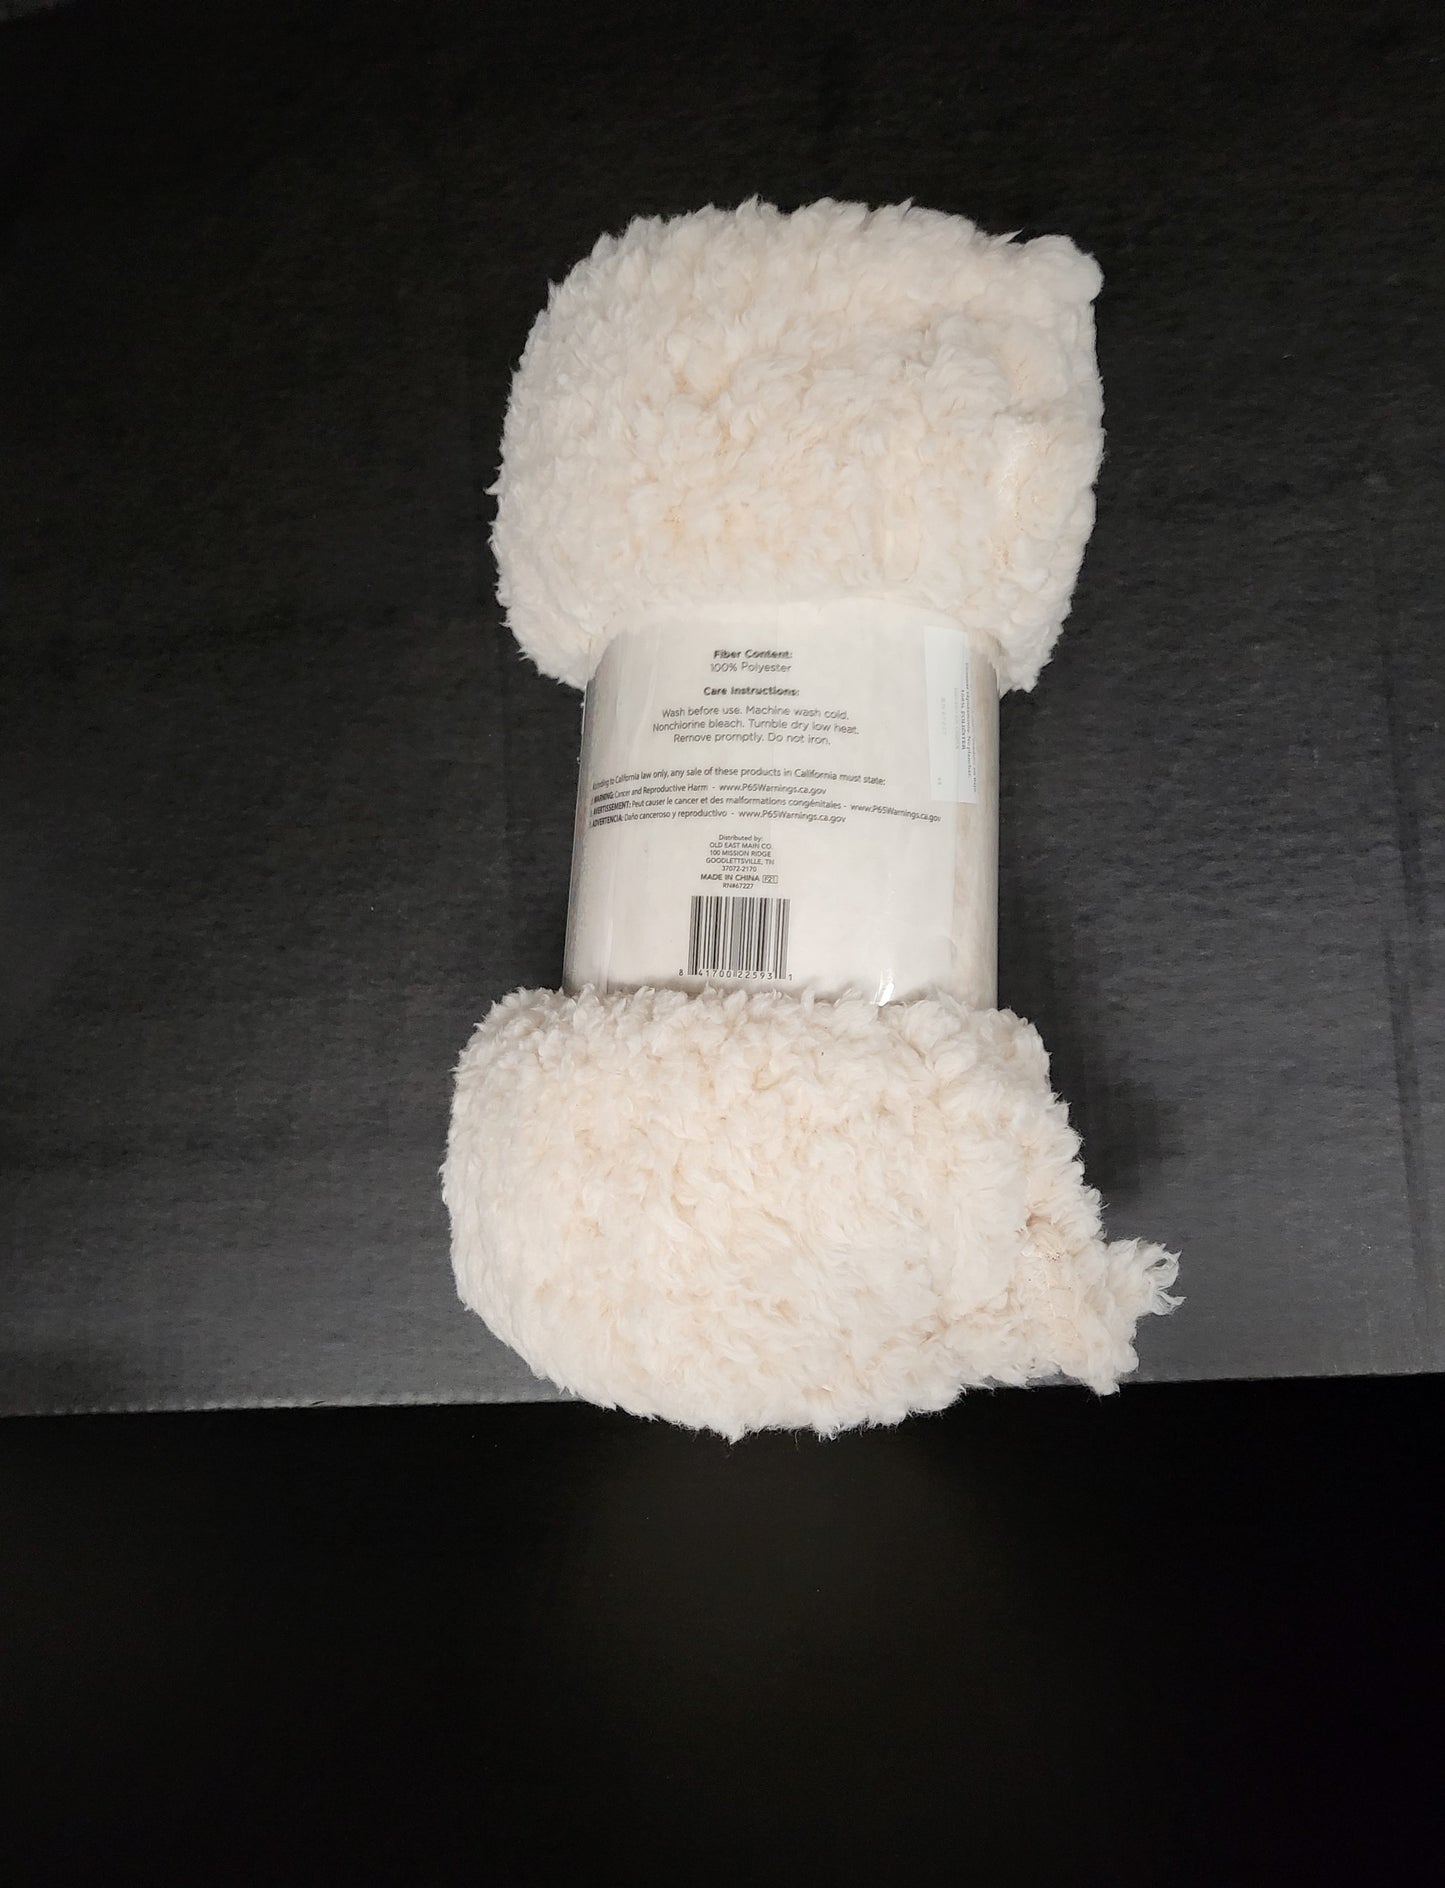 Teddy Sherpa Throw 50in x 60in Super Soft in different colors